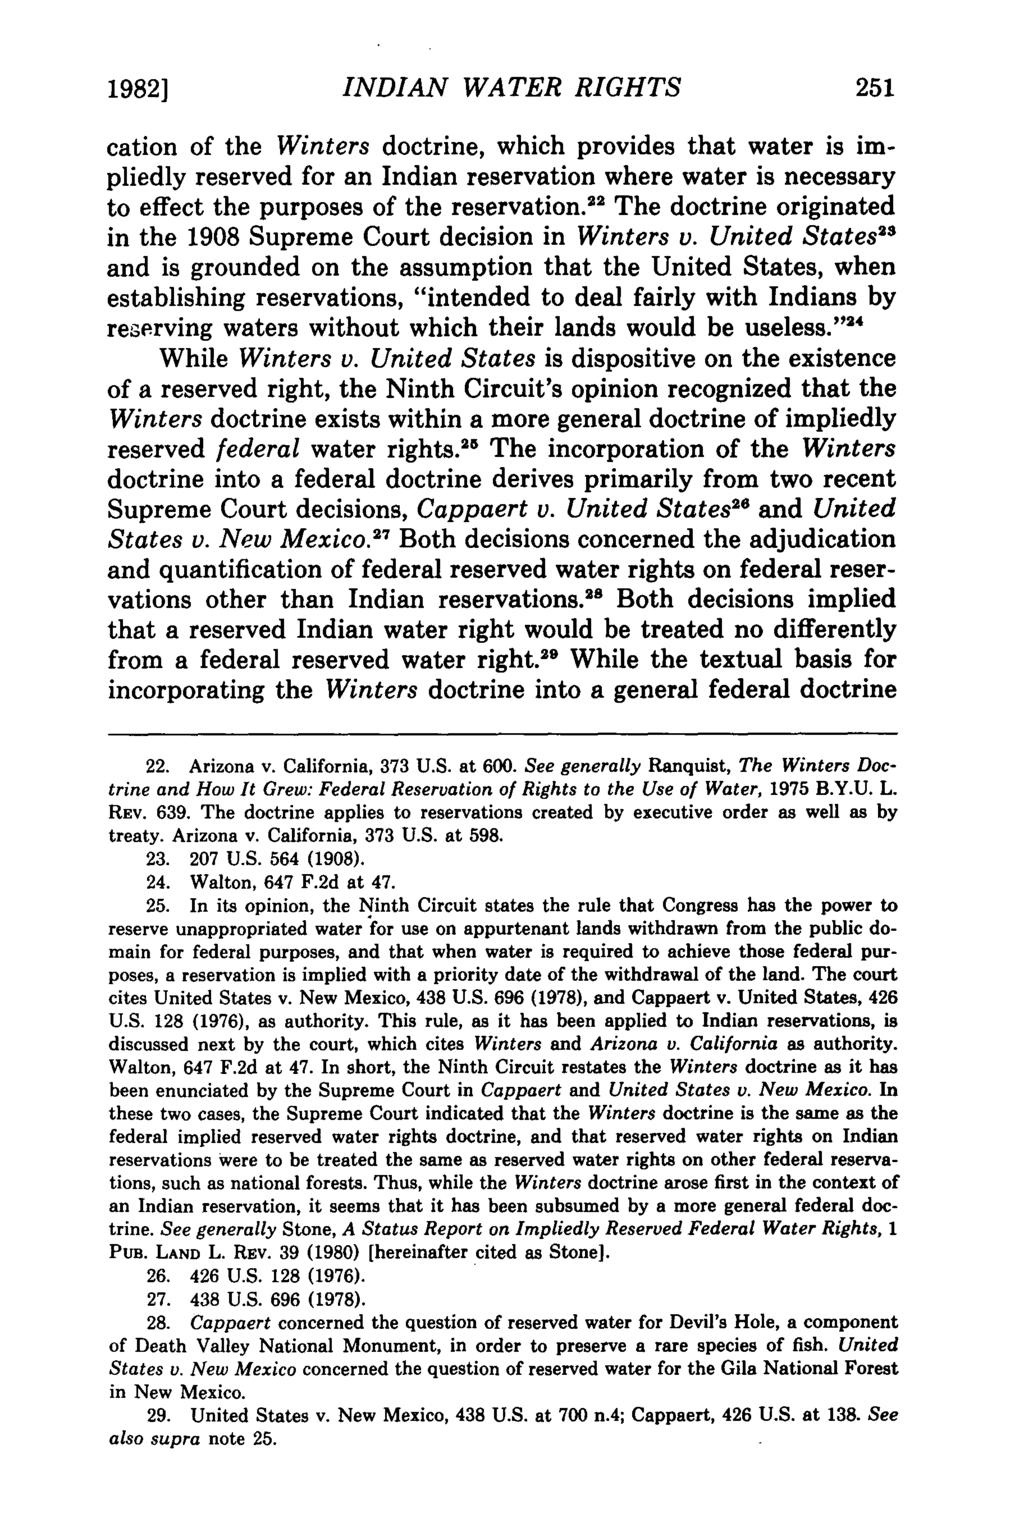 Isham: Indian Water Rights 1982] INDIAN WATER RIGHTS cation of the Winters doctrine, which provides that water is impliedly reserved for an Indian reservation where water is necessary to effect the